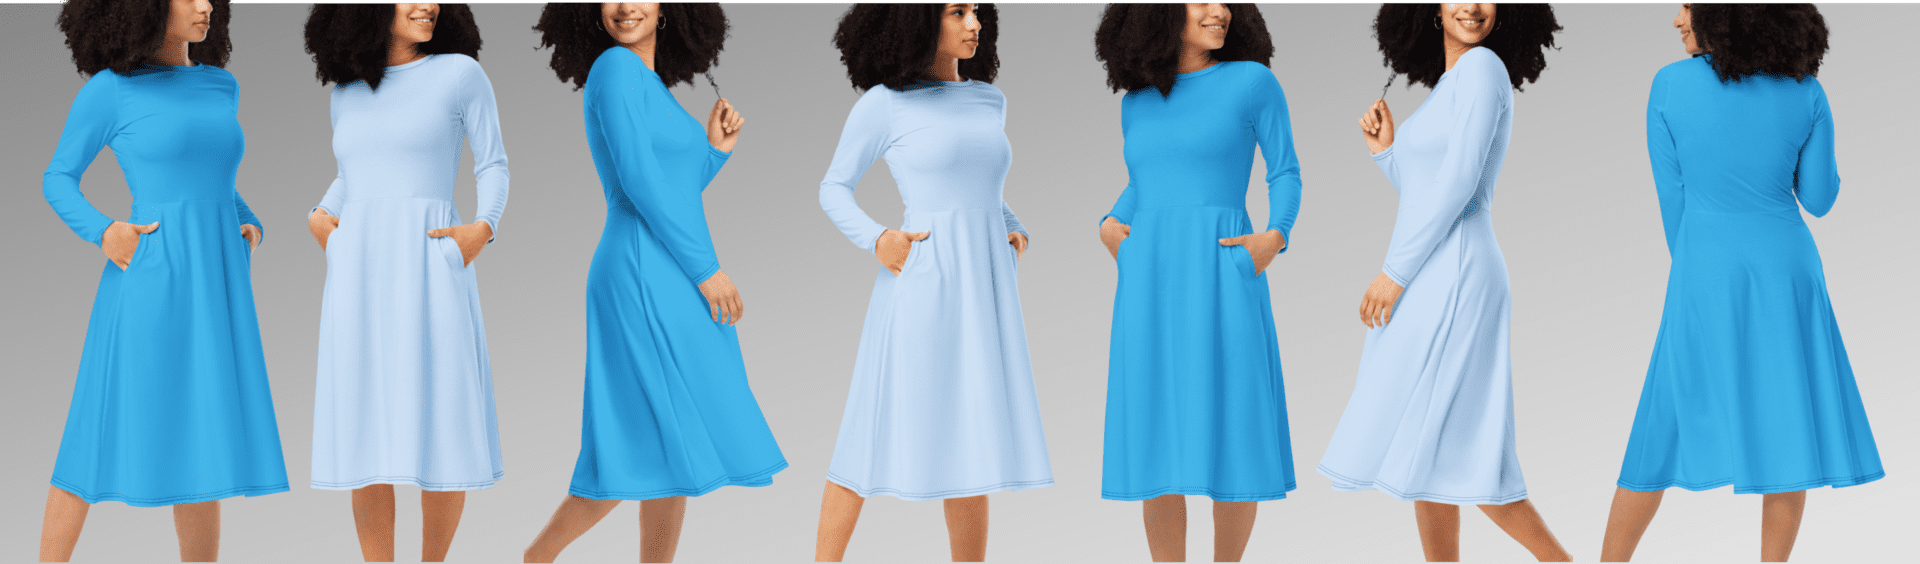 Women in blue and light blue dresses with pockets.